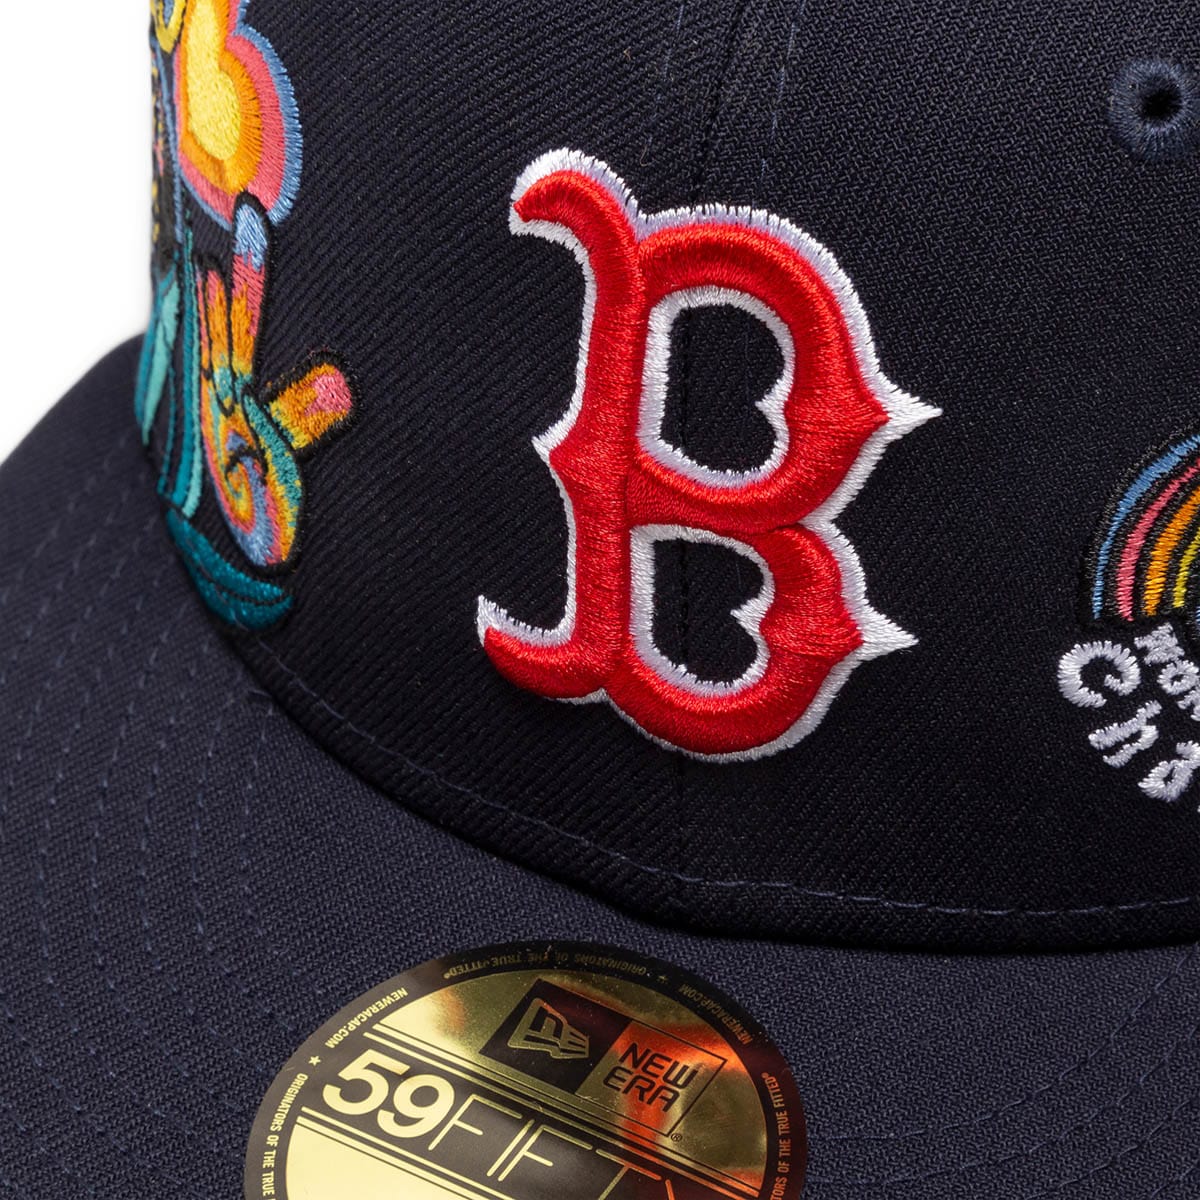 59FIFTY BOSTON RED SOX GROOVY FITTED CAP